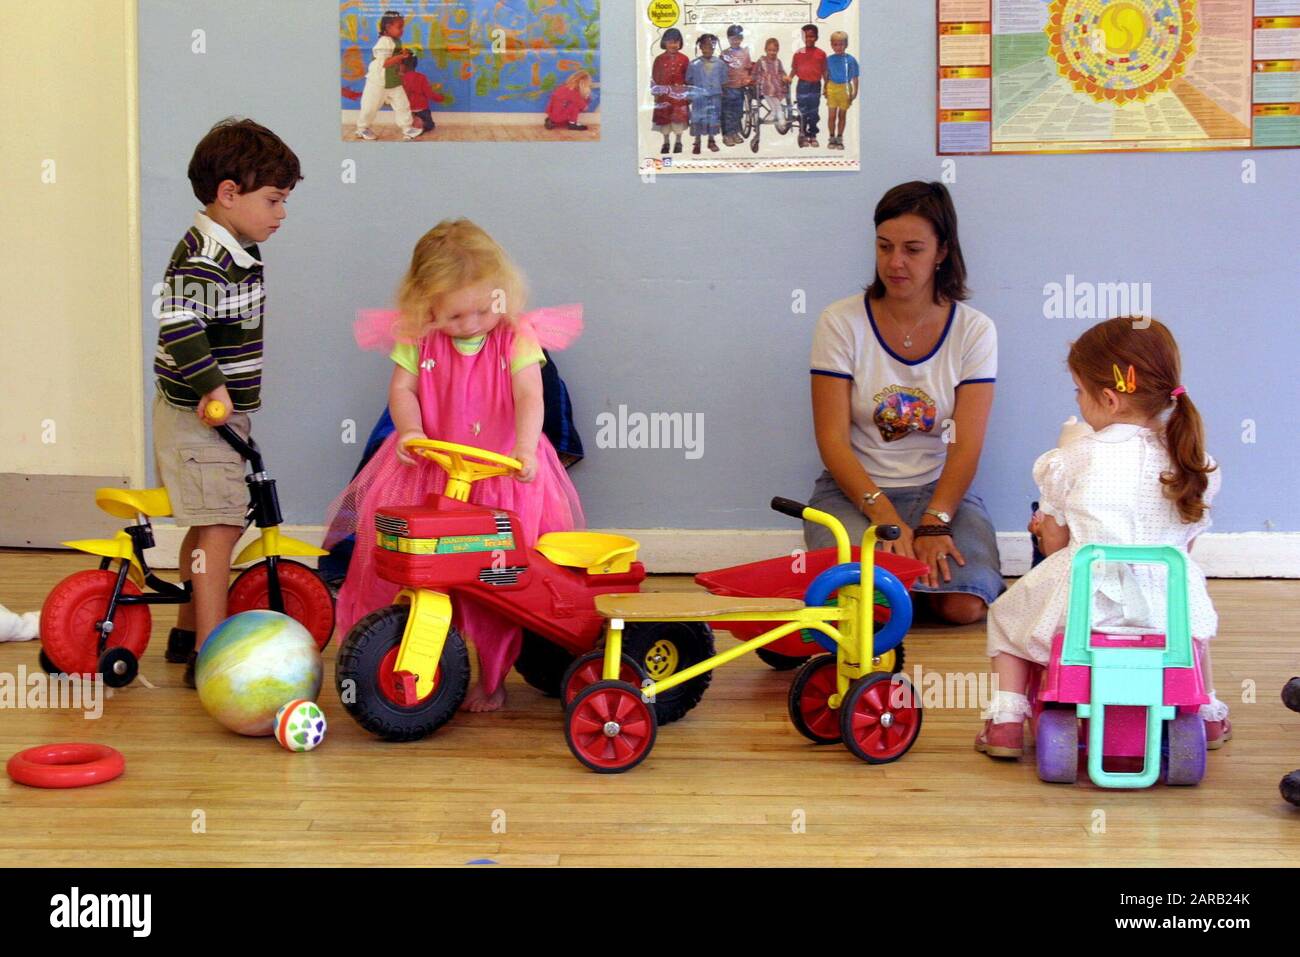 primary school children playing with tricycles and toys Stock Photo